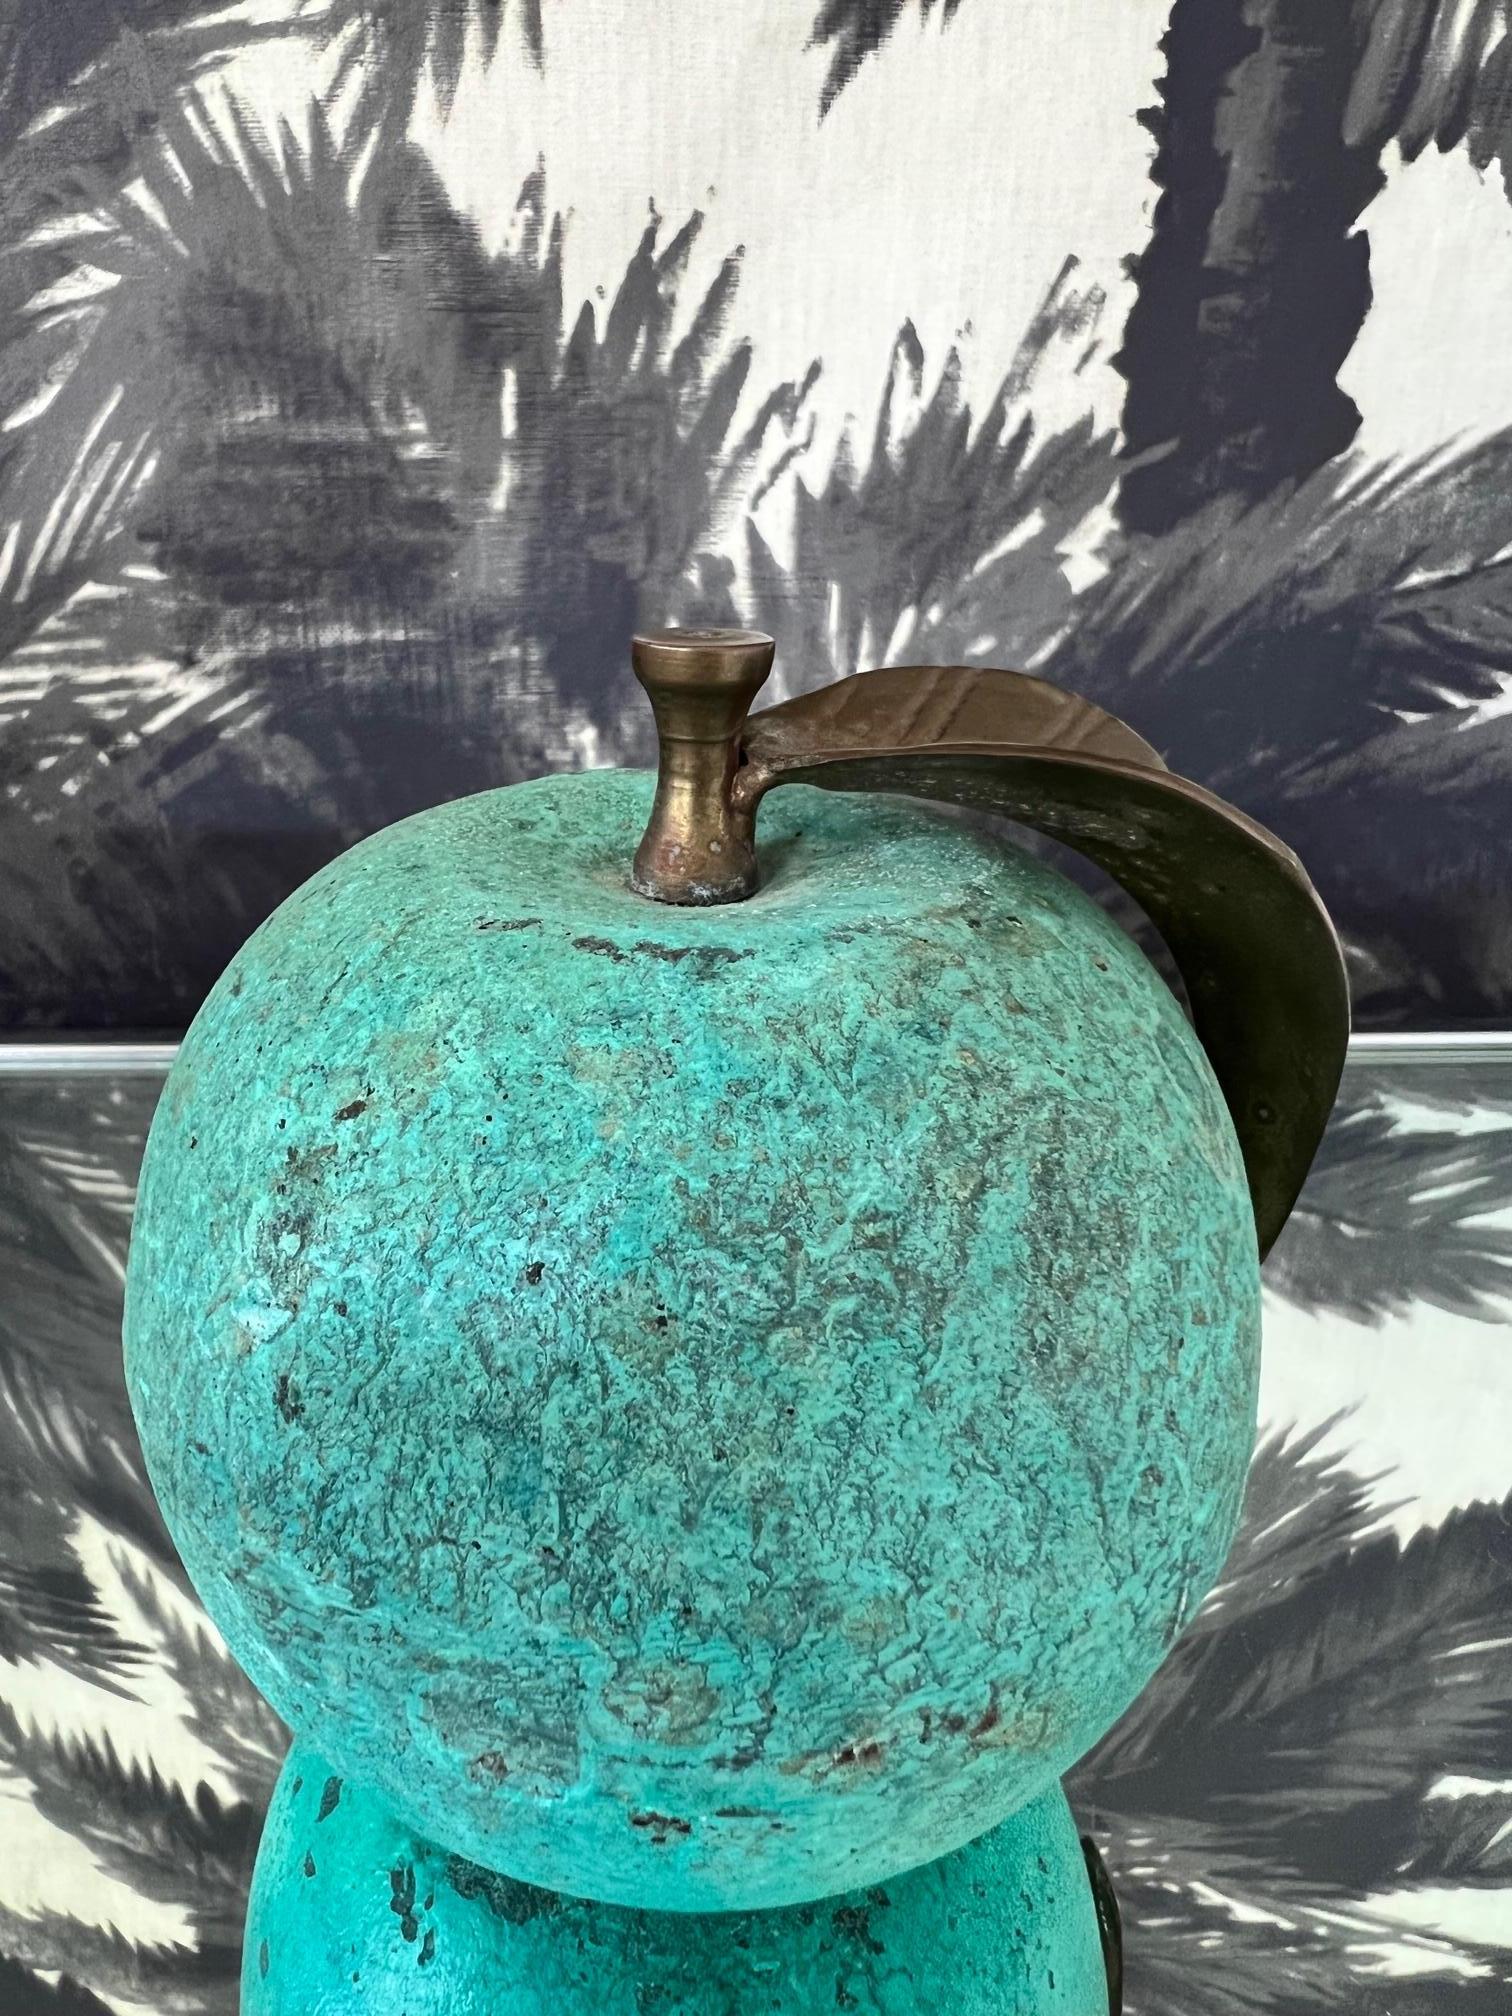 French Vintage Bronze Apple Paperweight with Green Oxidized Patina, c. 1970's